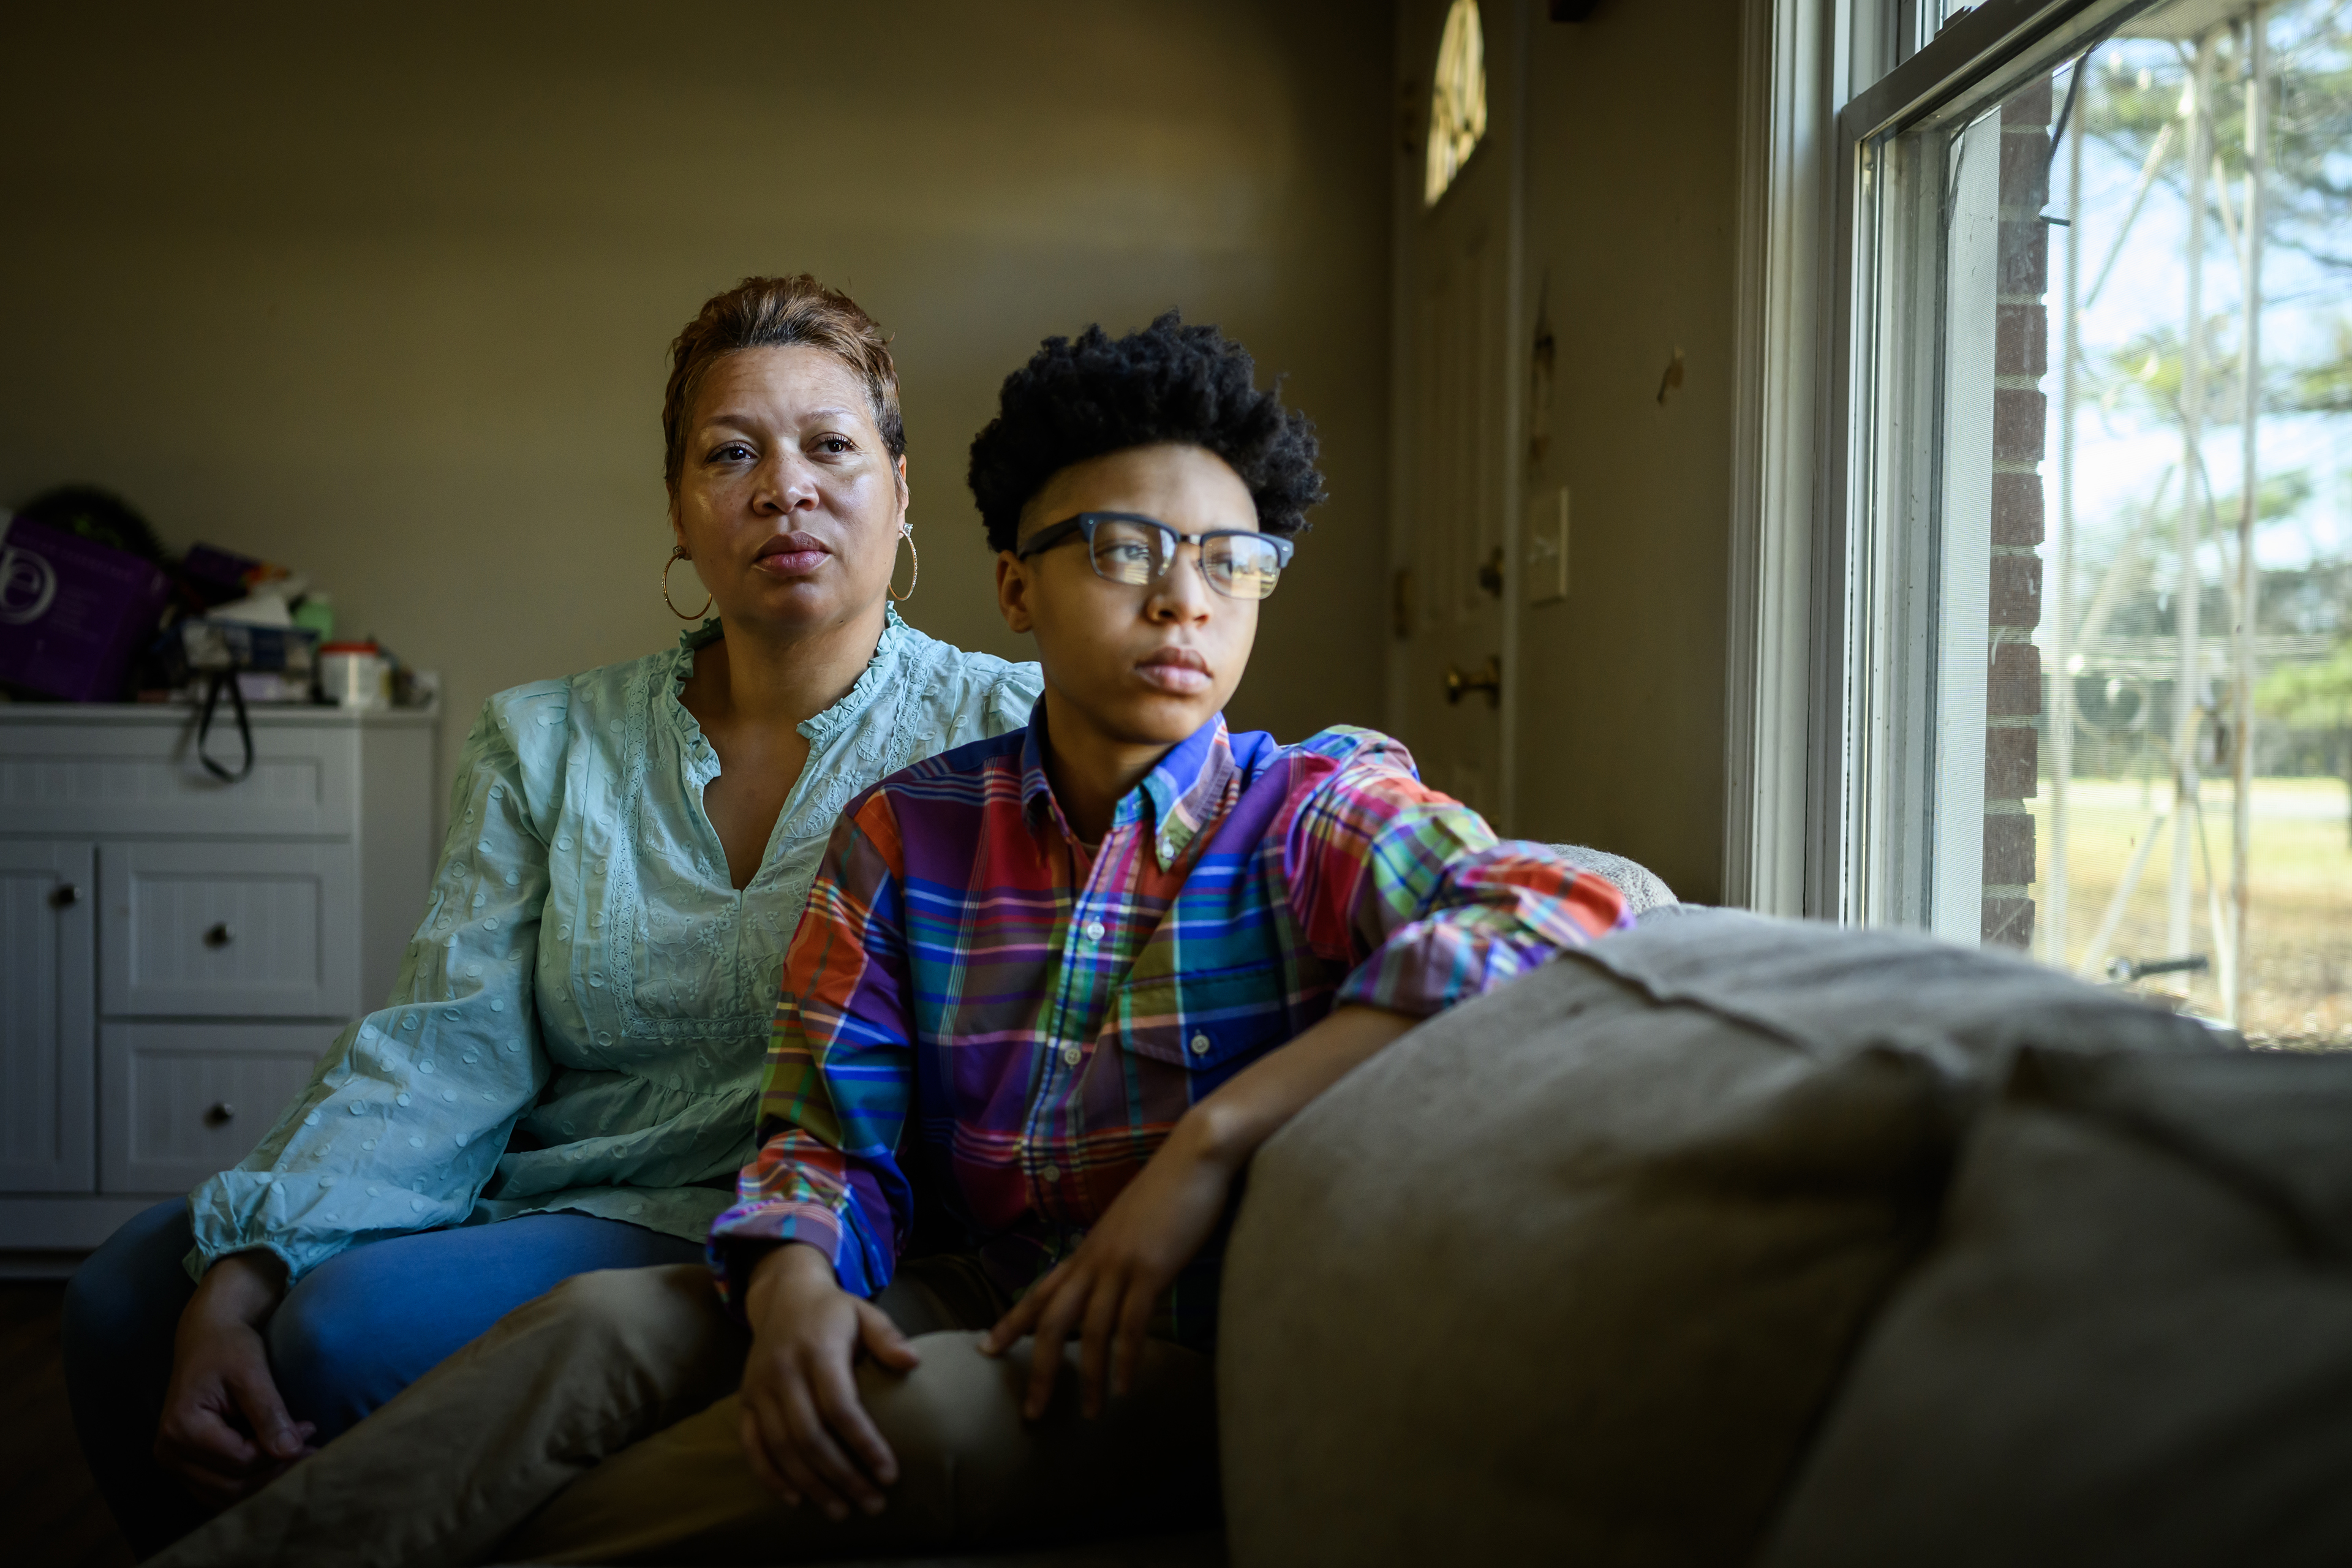 DiJuana Davis and her child Treasure Woodard sit on a couch in their home.